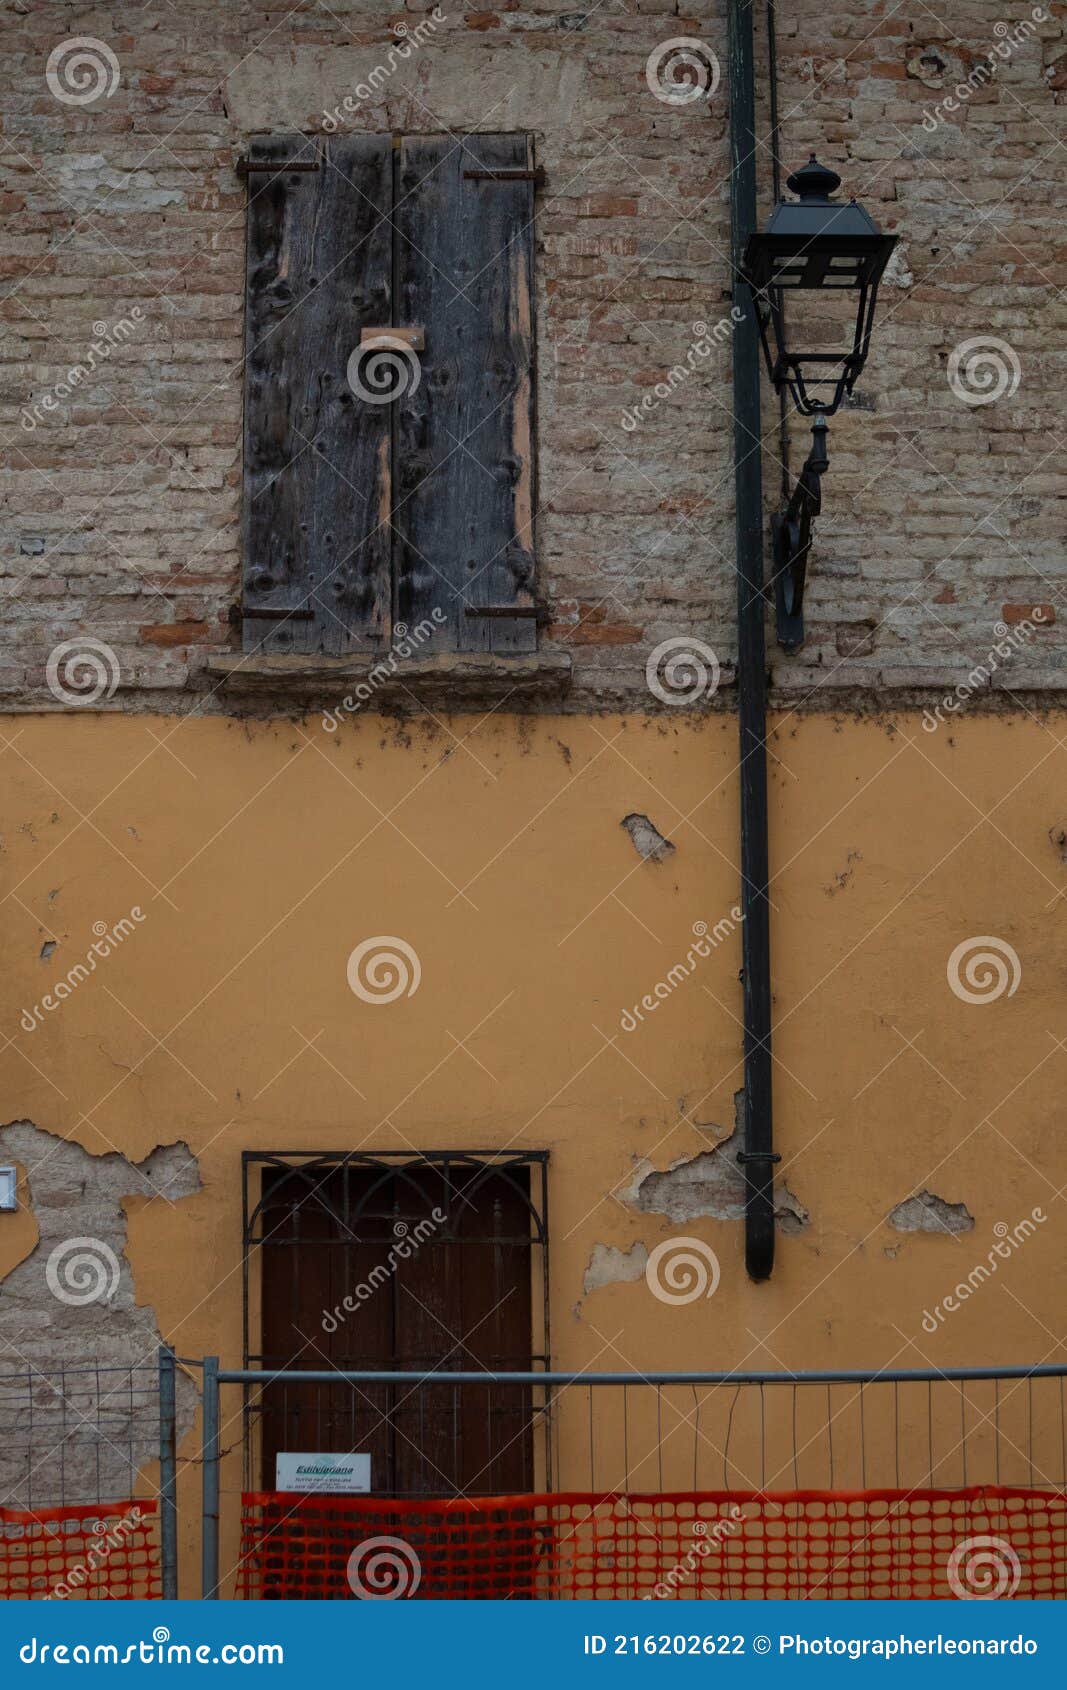 abandoned house with brick facades and closed windows, italy